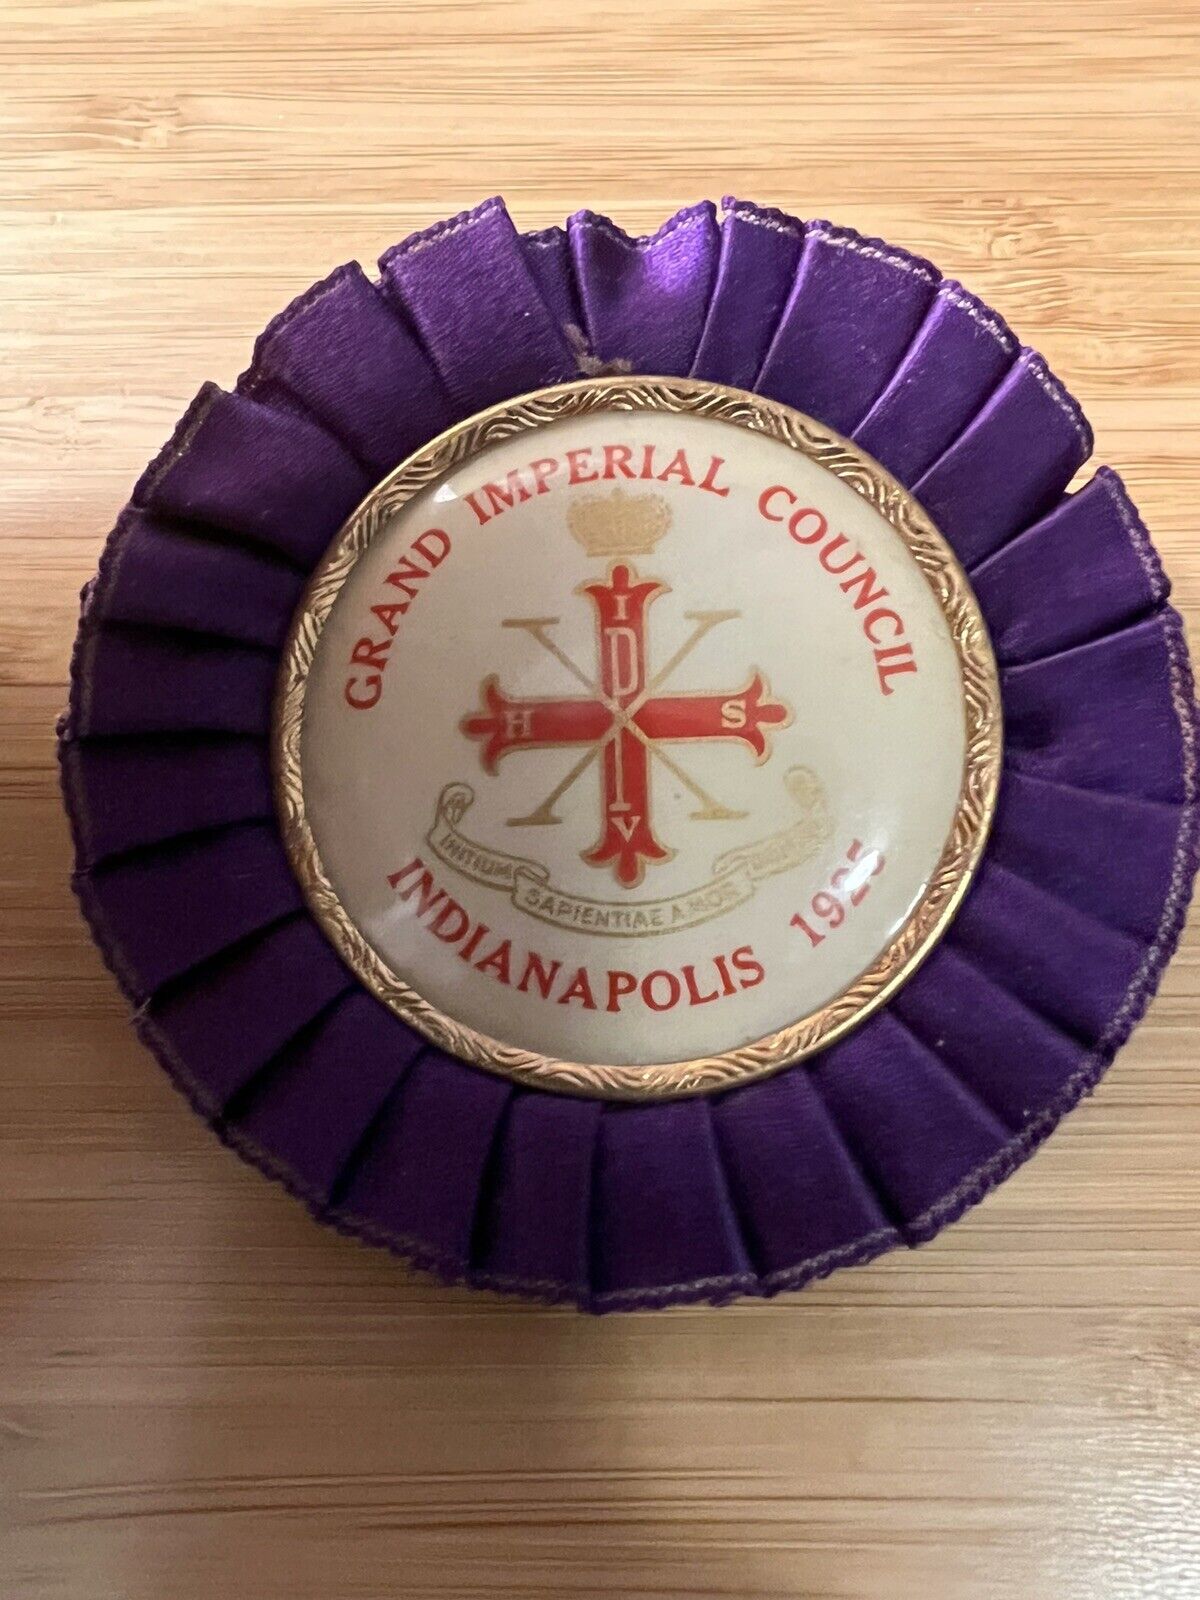 1925 RED CROSS OF CONSTANTINE GRAND IMPERIAL COUNCIL INDIANAPOLIS BADGE - K193